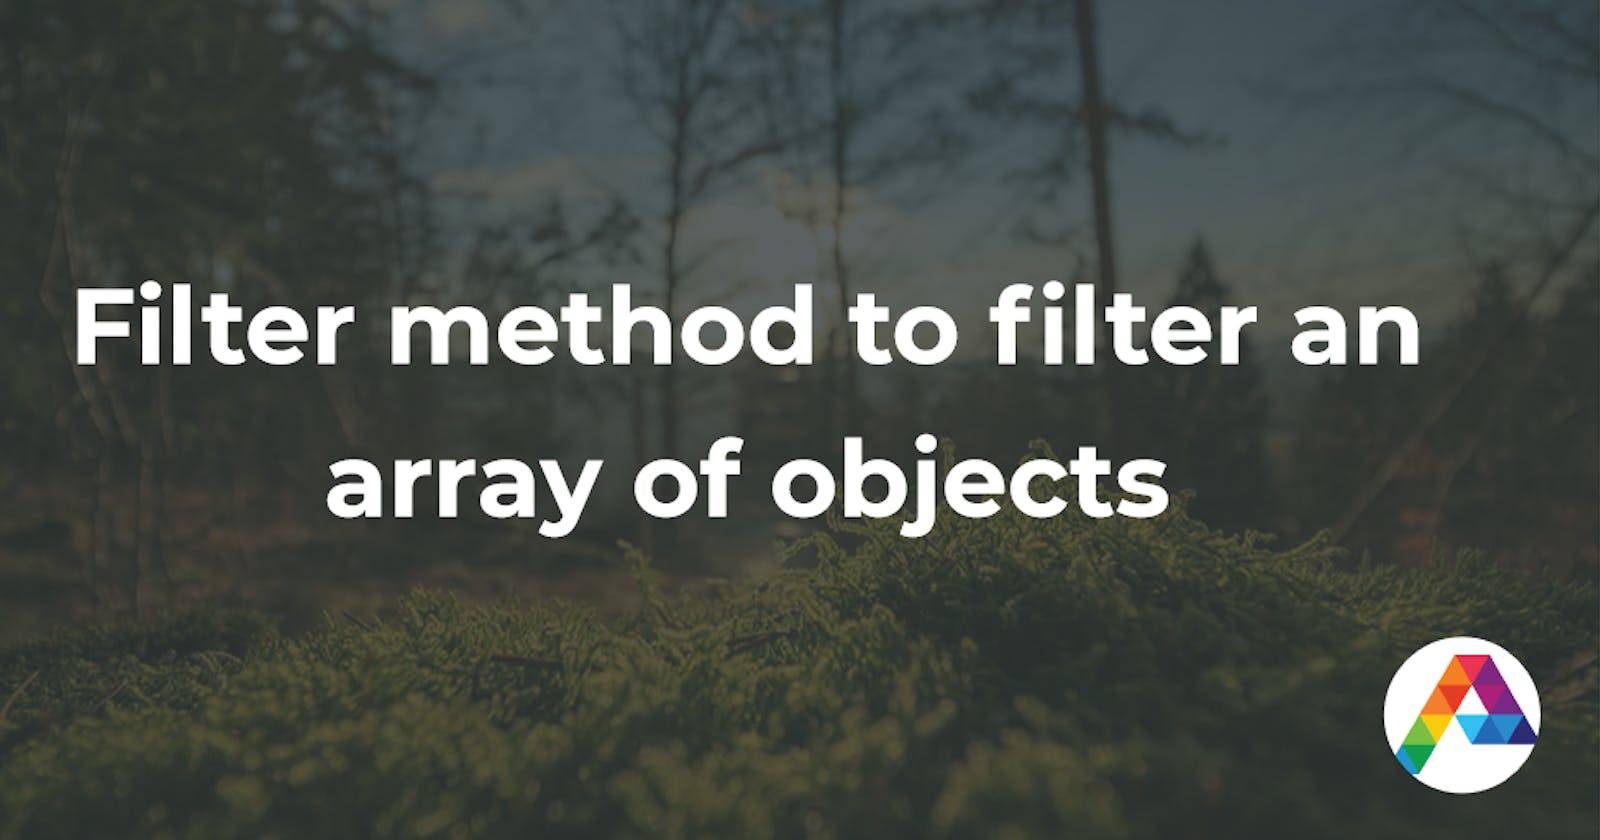 Filter method to filter an array of objects